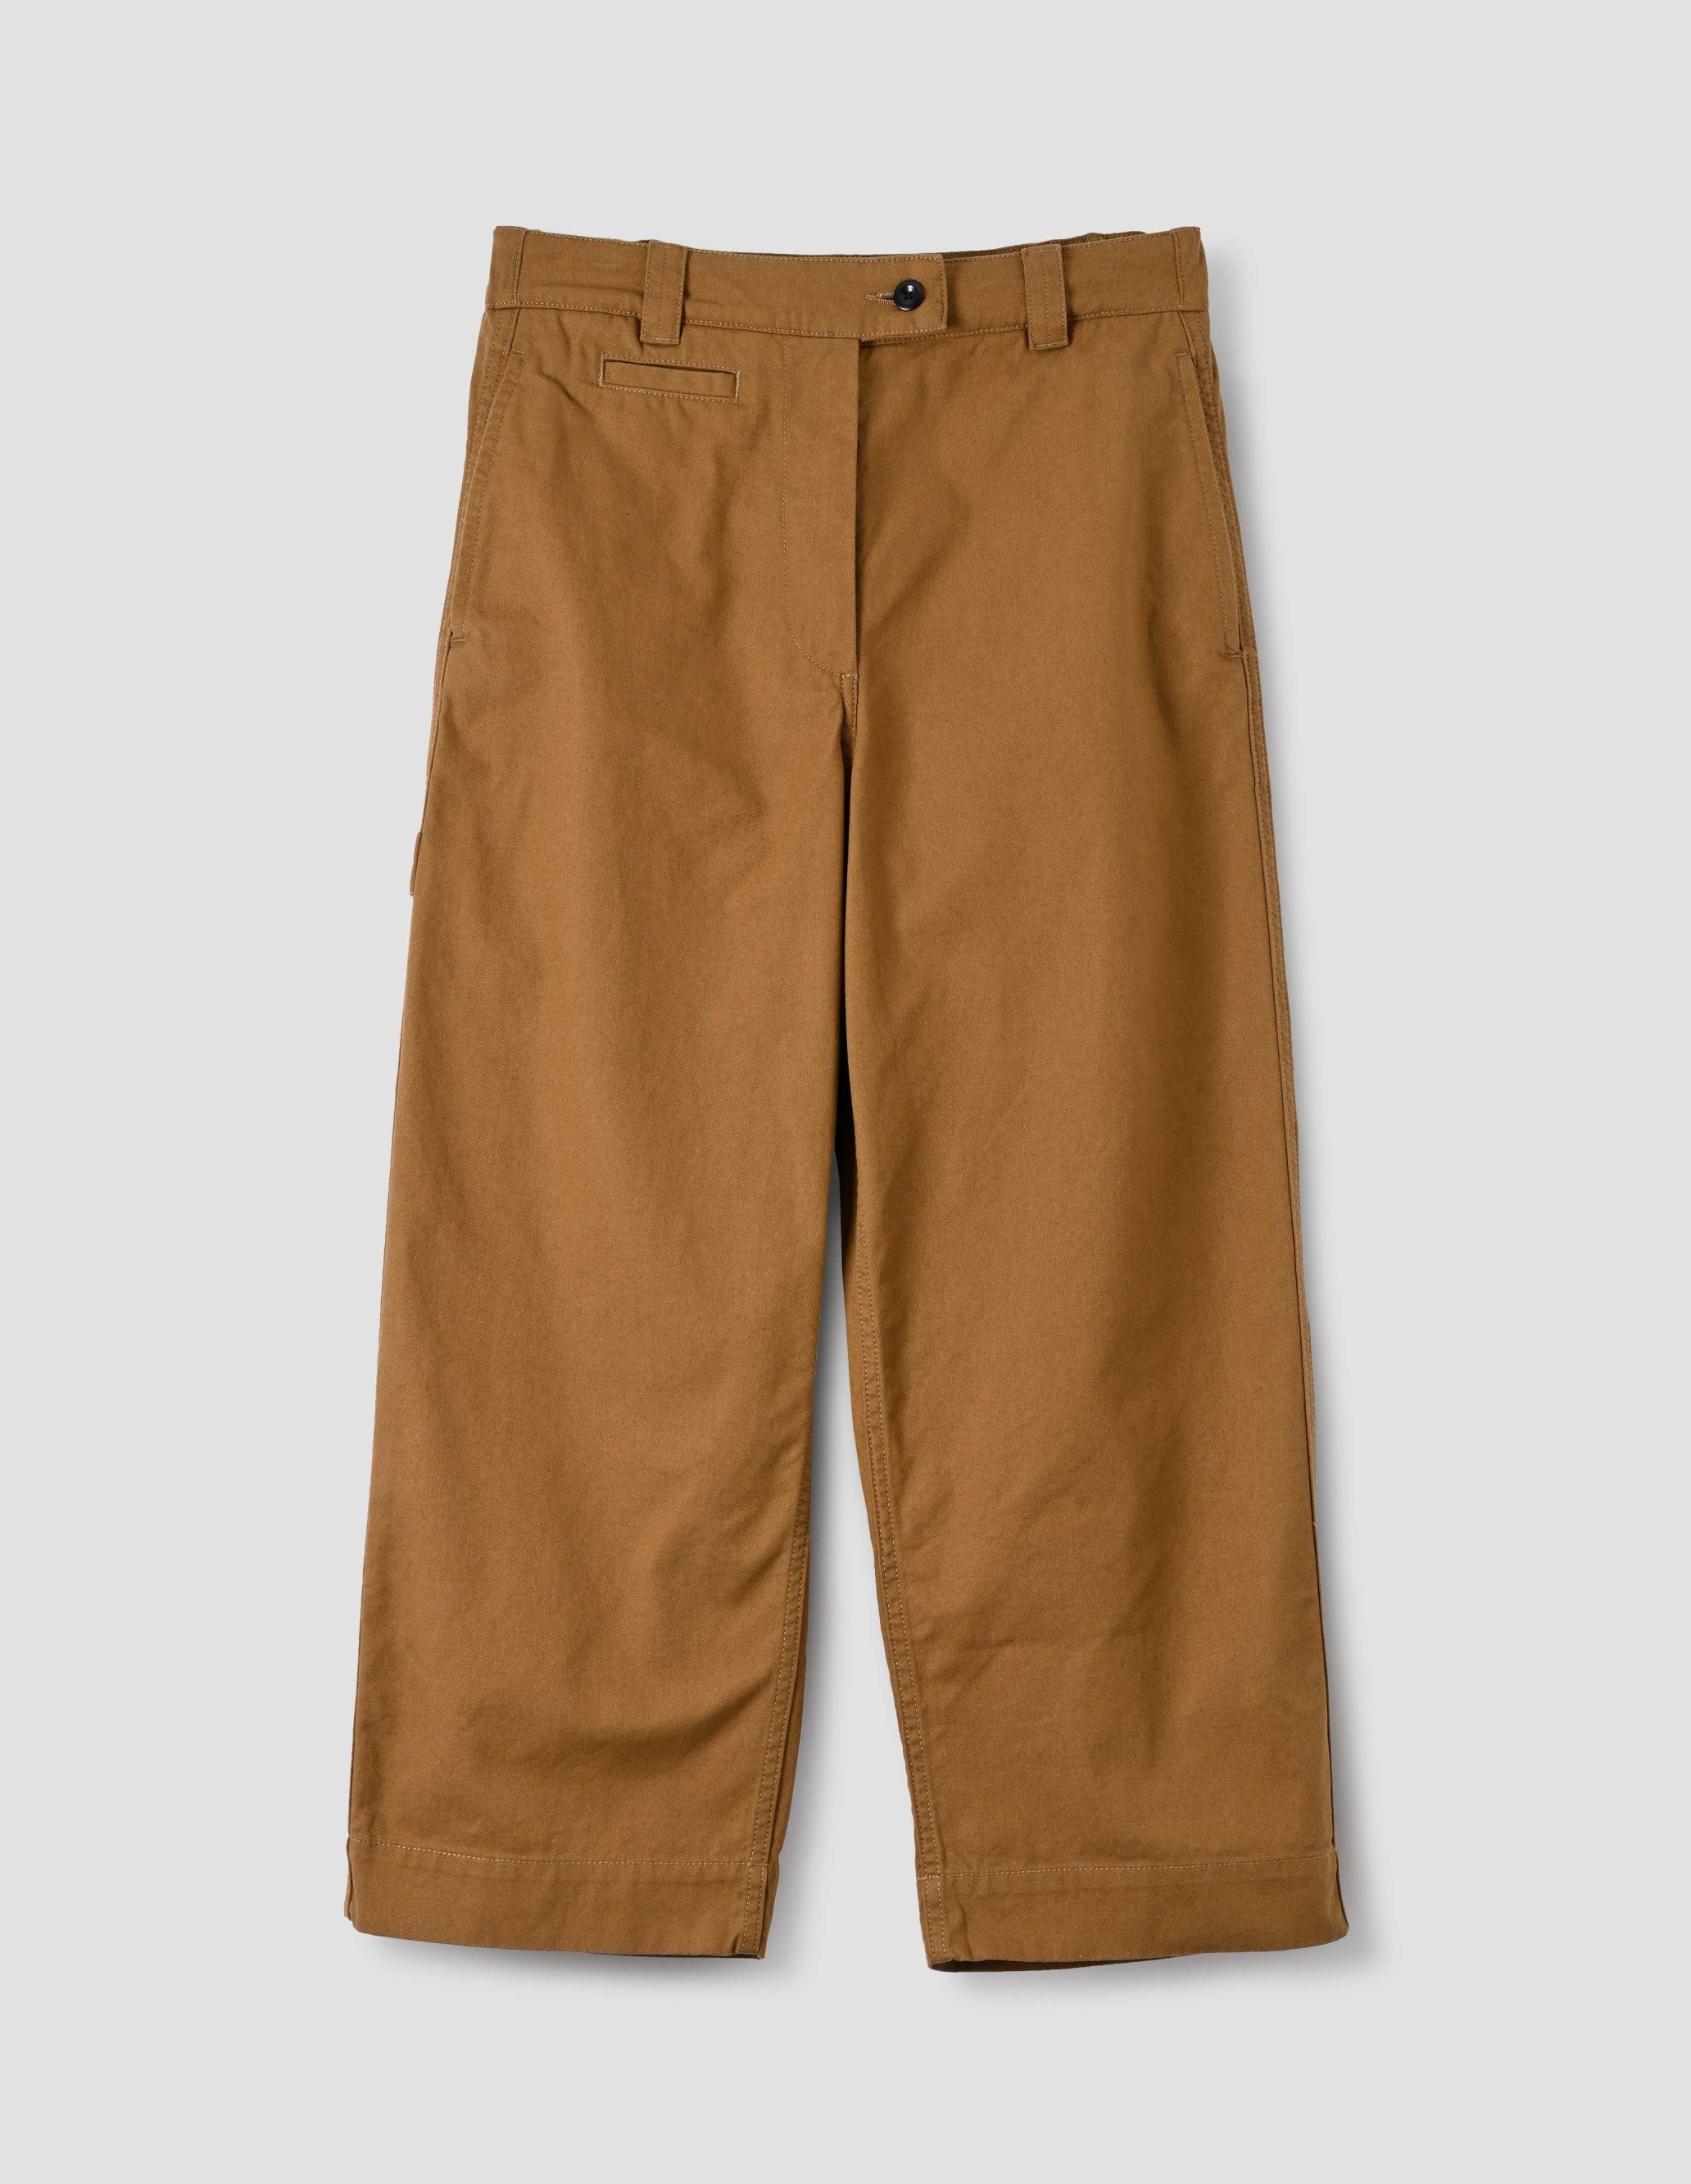 MARGARET HOWELL - Tobacco cotton carpenters trouser | MHL. by 